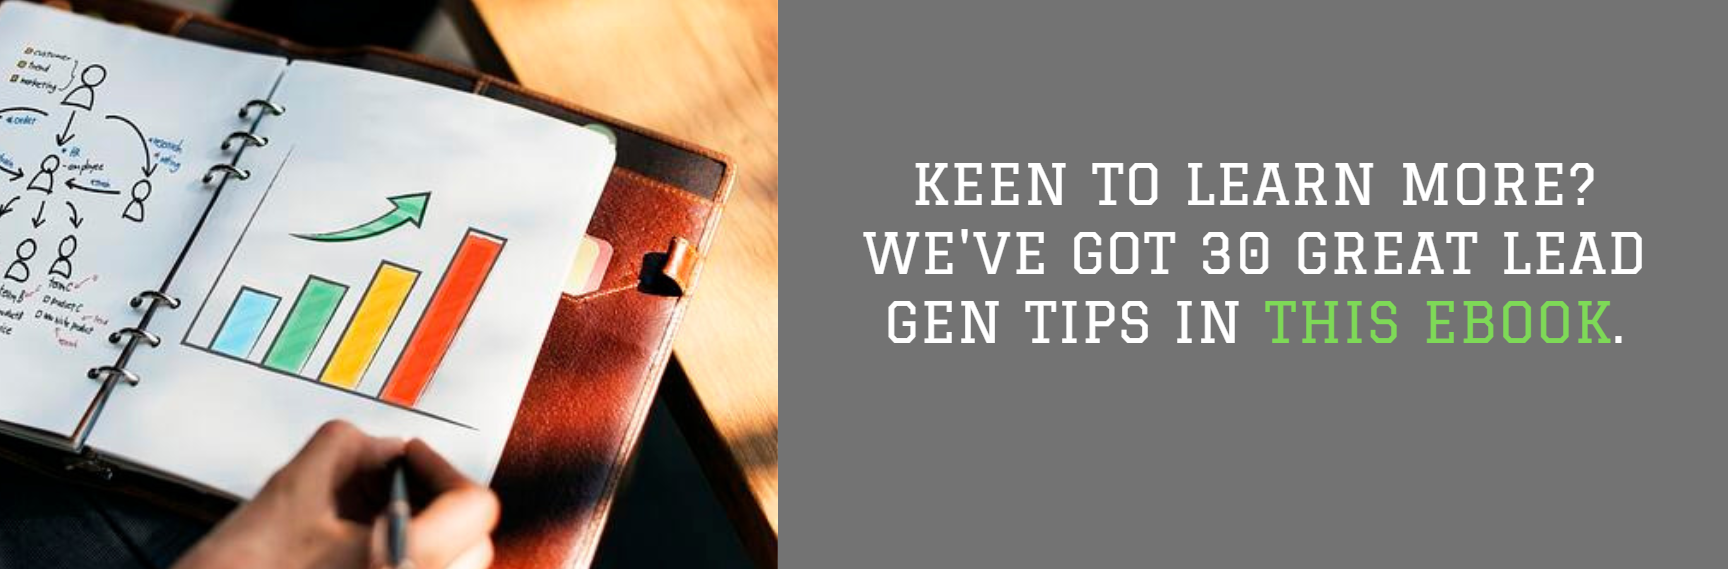 Keen to learn more? We've got 30 great lead gen tips in this ebook.